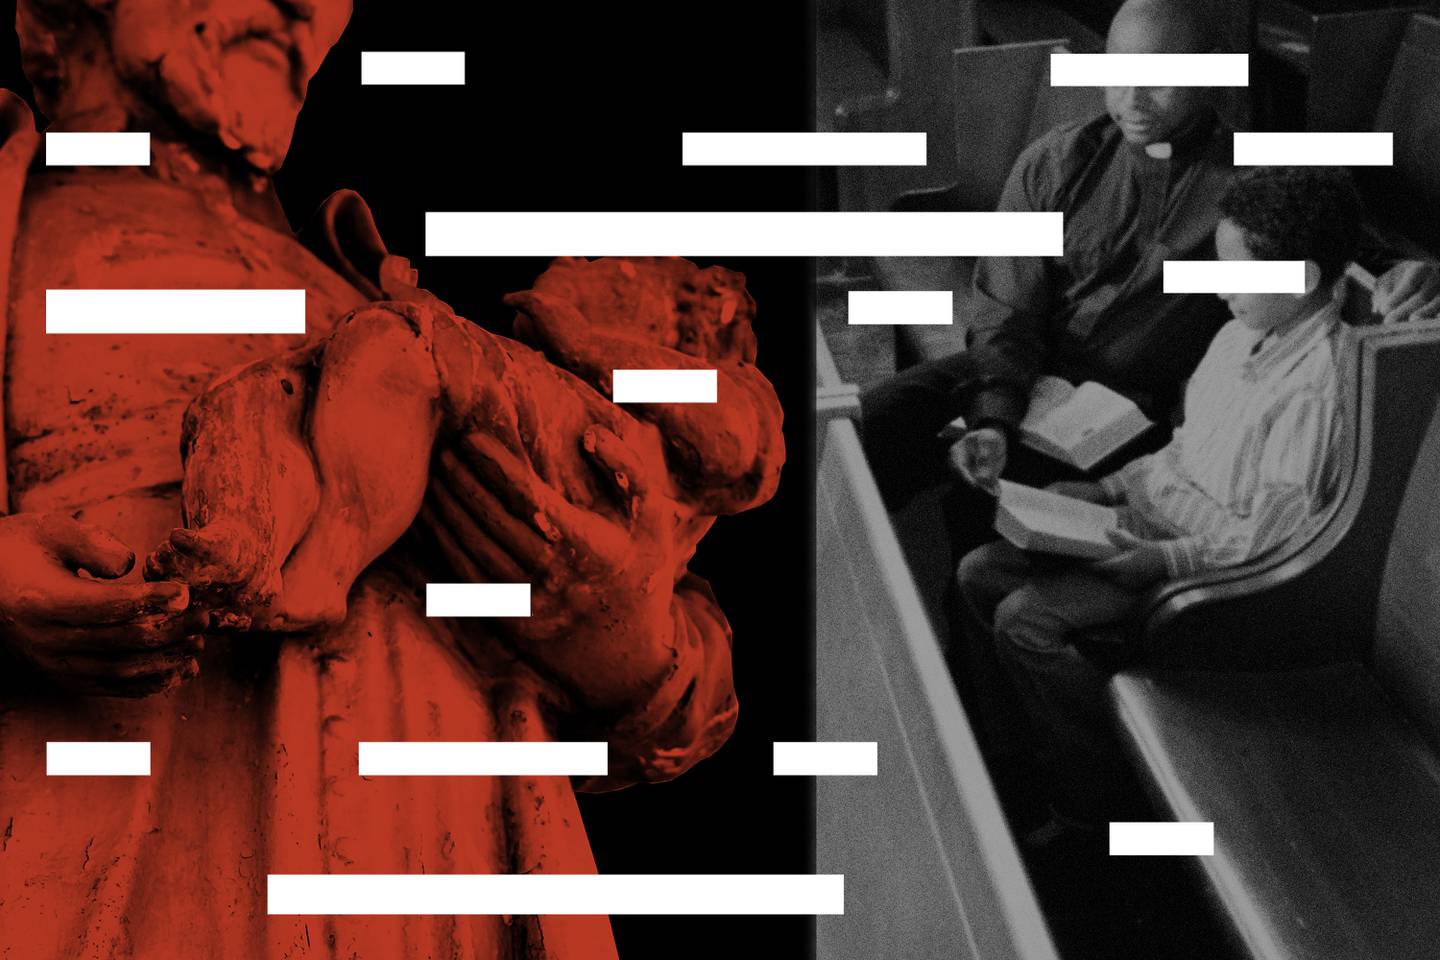 Photo collage showing statue of man cradling infant in arms next to image of priest and boy sitting in pews reading Bibles, overlayed with variety of short and long white redaction boxes.